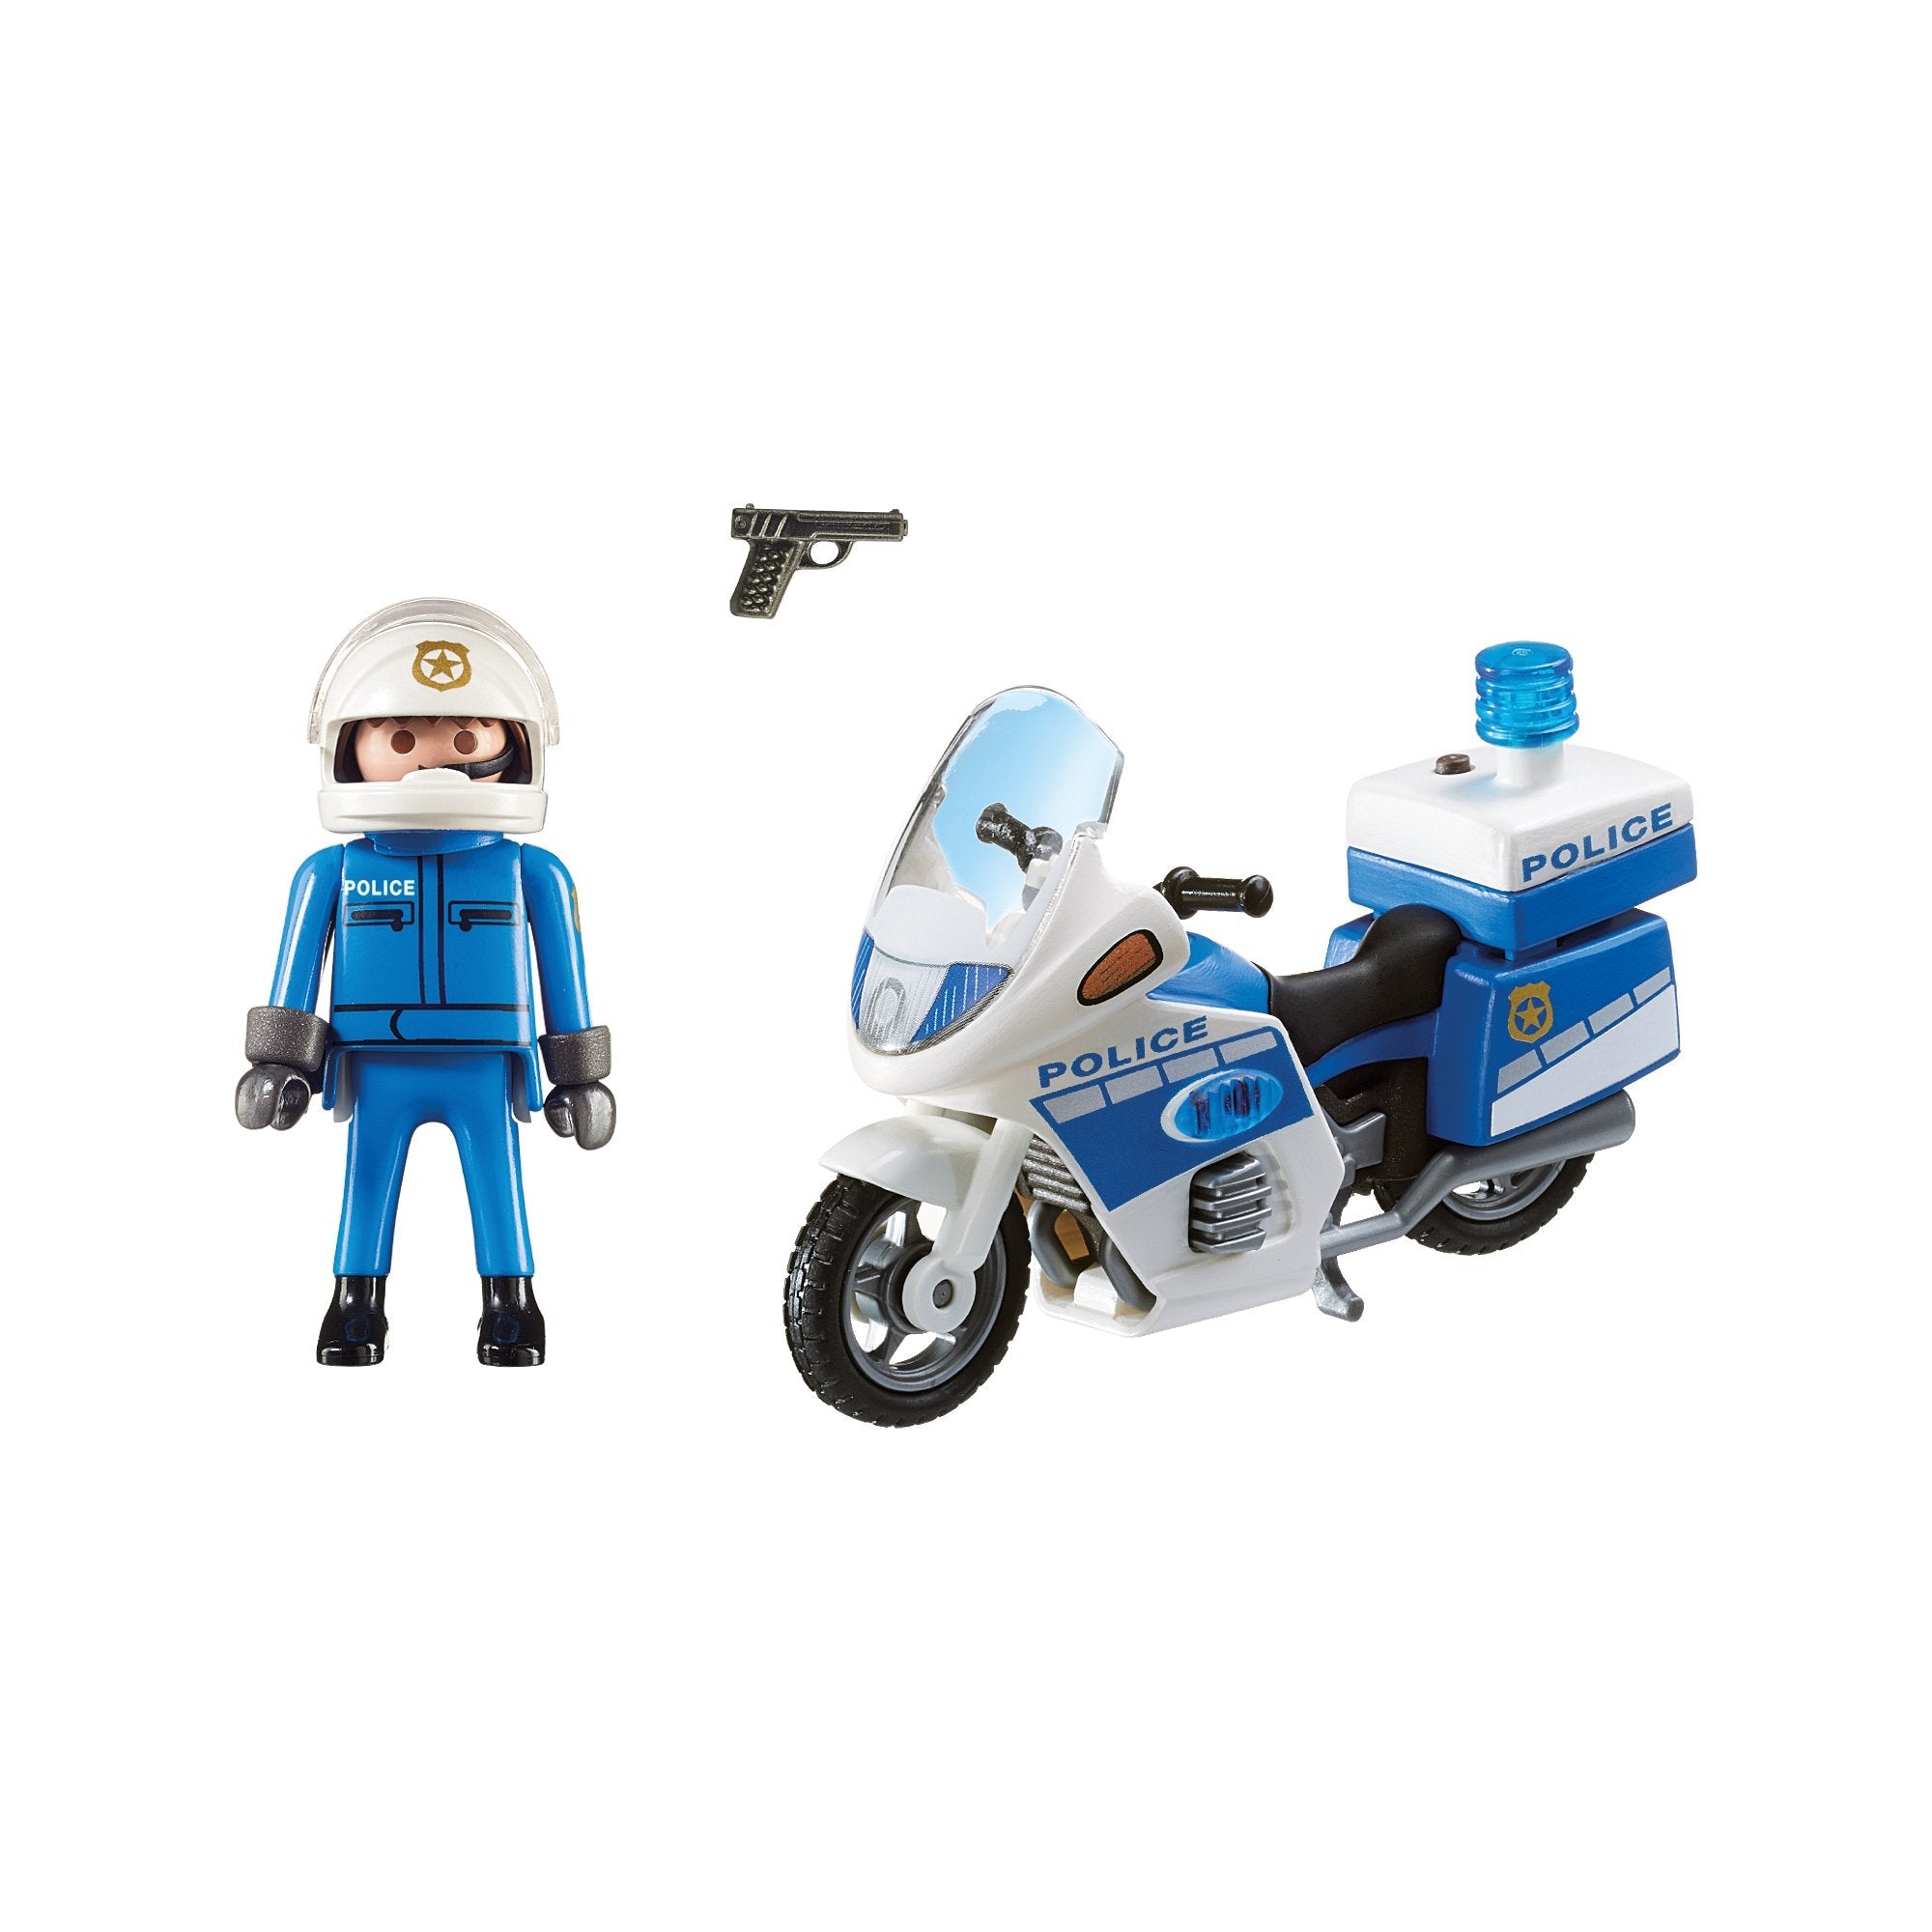 Playmobil Boys with Motorcycle - A2Z Science & Learning Toy Store